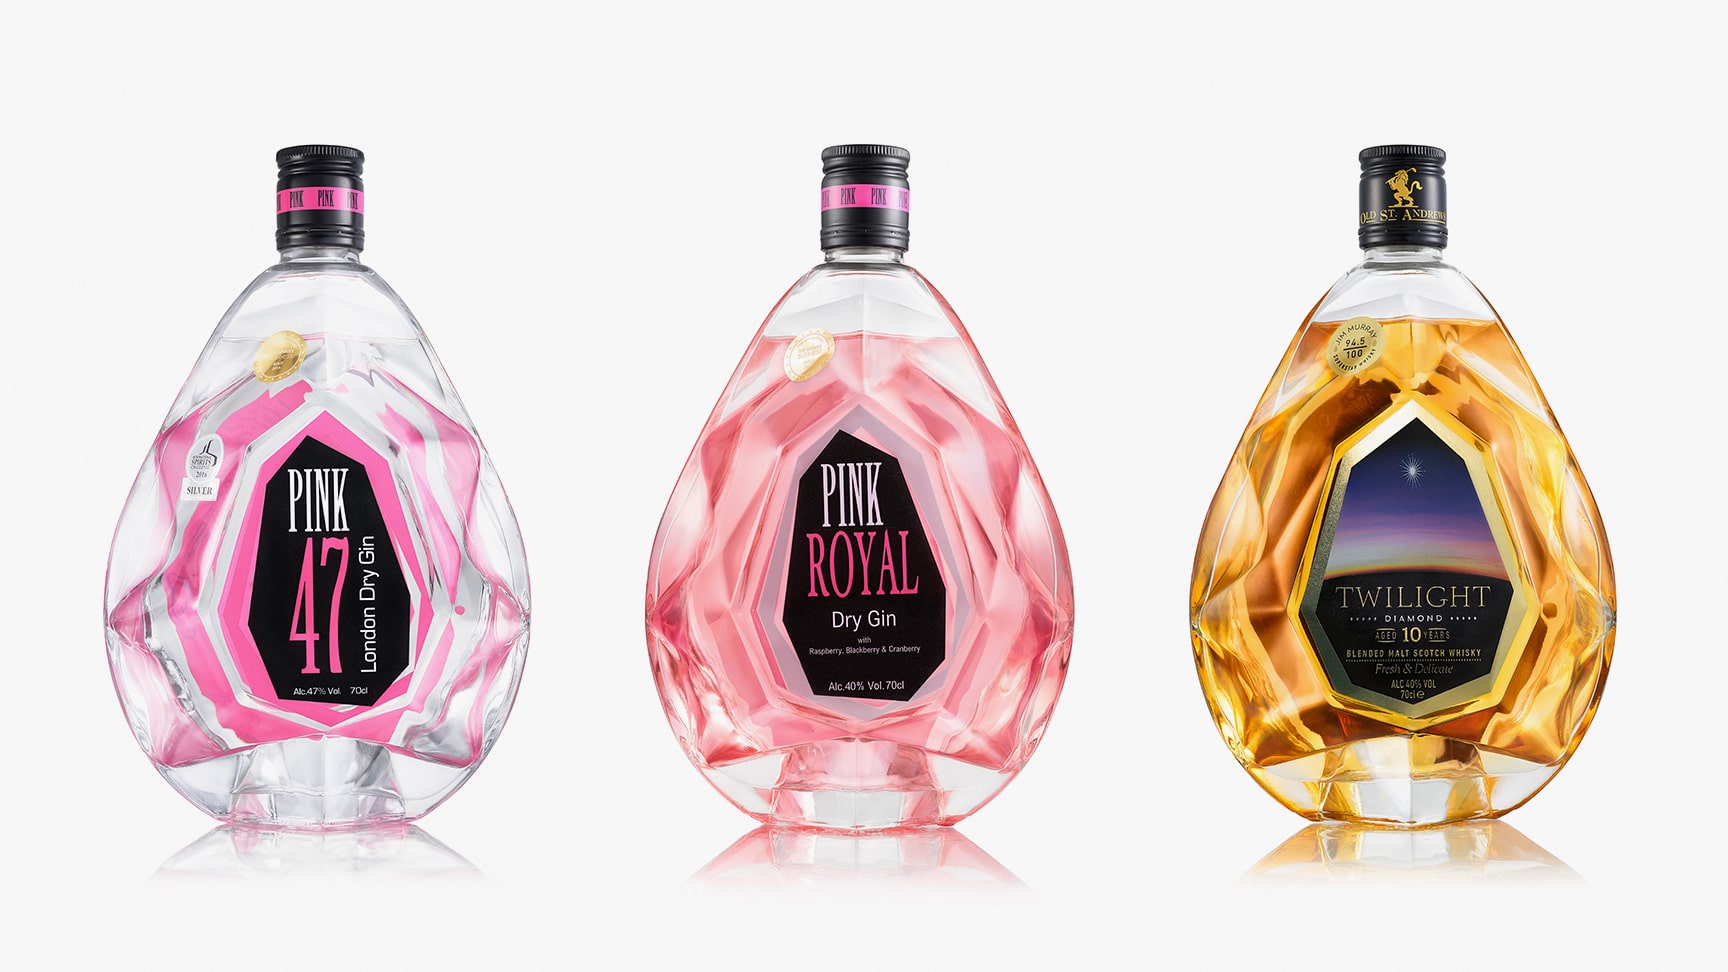 Product photography on white background, of 3 whiskey bottles: Pink 47, Pink Royal and Twilight Diamond. The whiskey bottles are well lit, have vivid colors, and clean reflections.